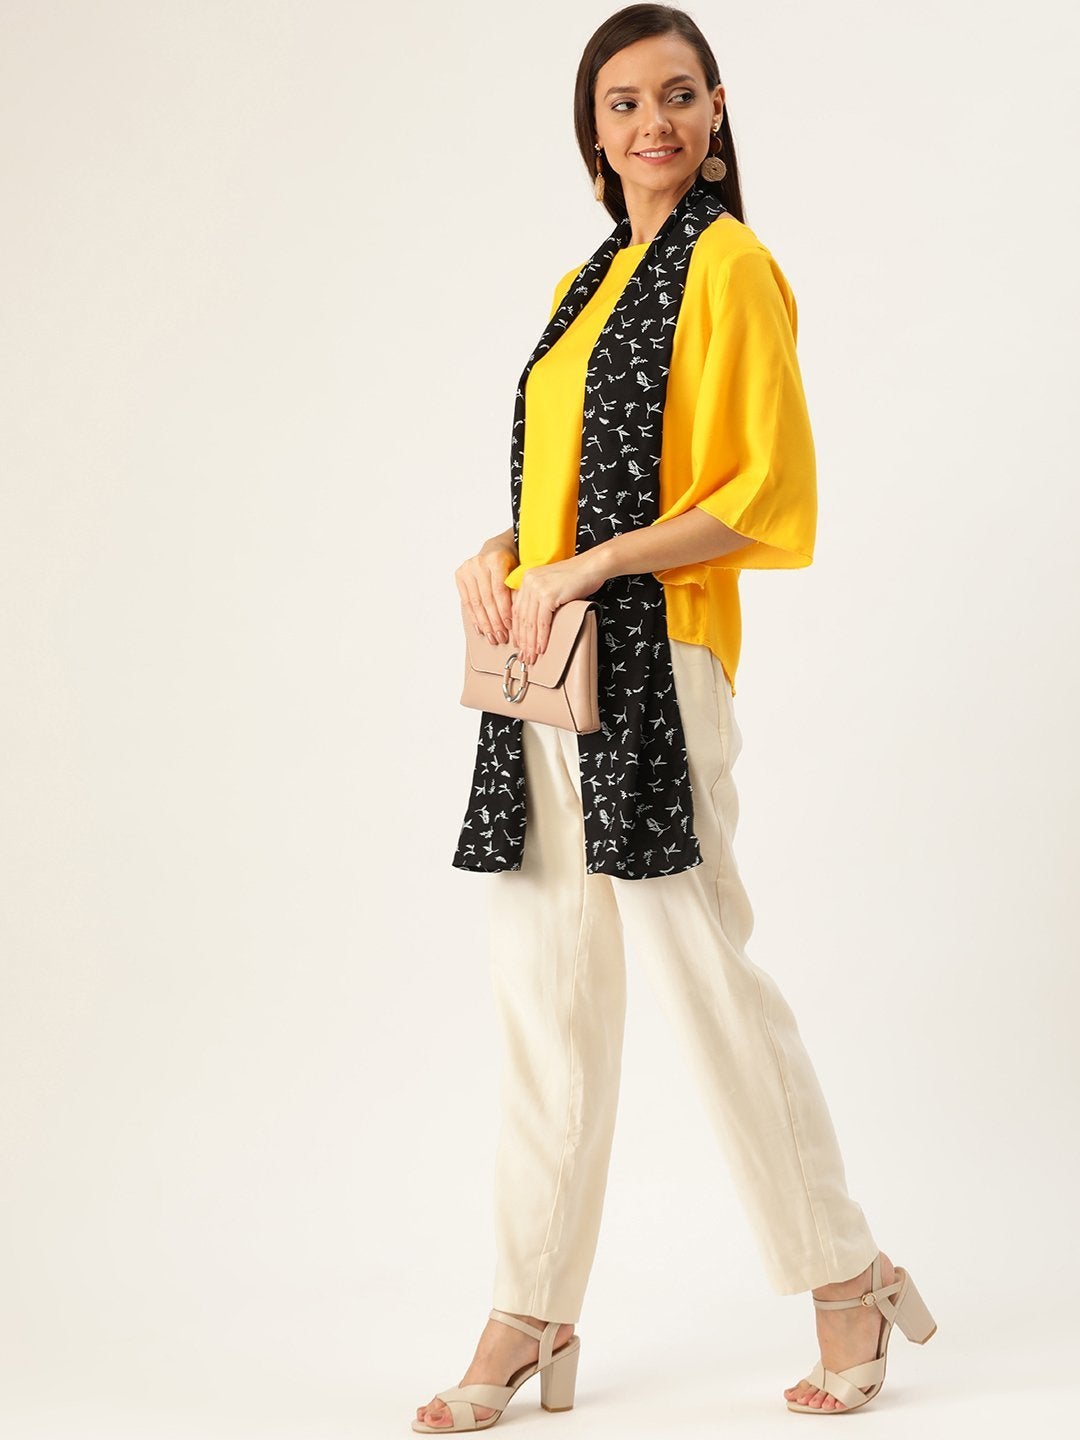 Women's Yellow Top With Black Stole - InWeave